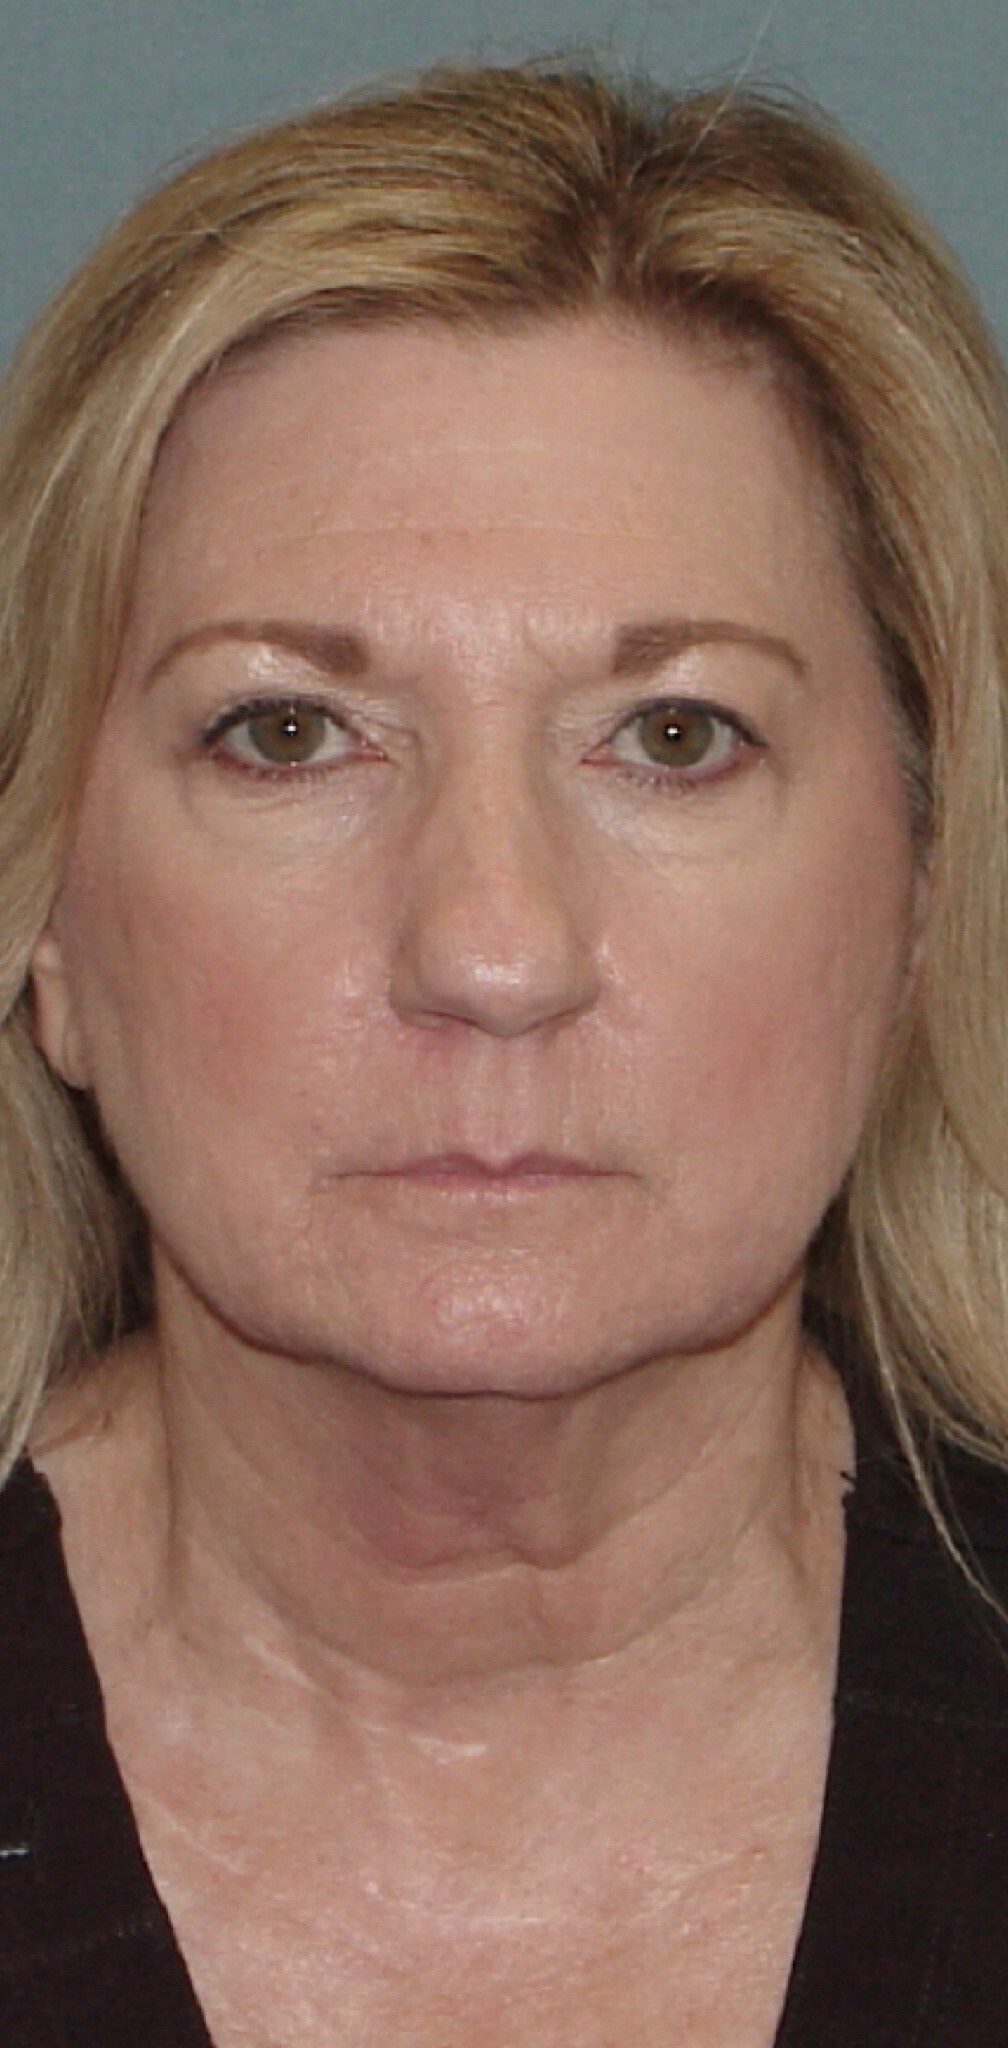 Photo of the patient’s face before the Facelift surgery. Set 1. Patient 3